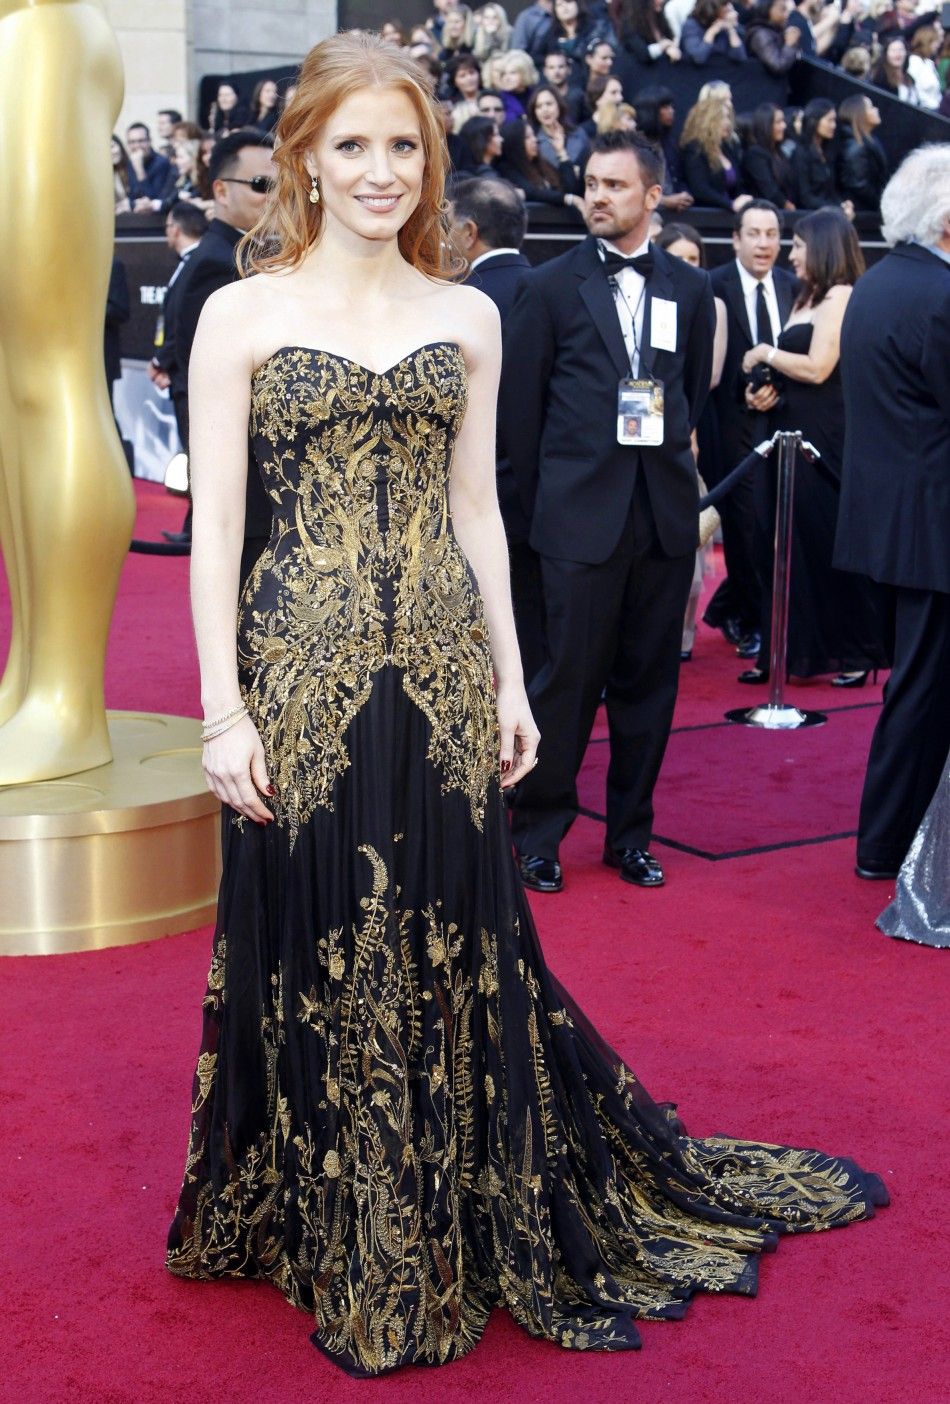 Jessica Chastain, best supporting actress nominee for her role in quotThe Helpquot, arrives at the 84th Academy Awards in Hollywood, California February 26, 2012.